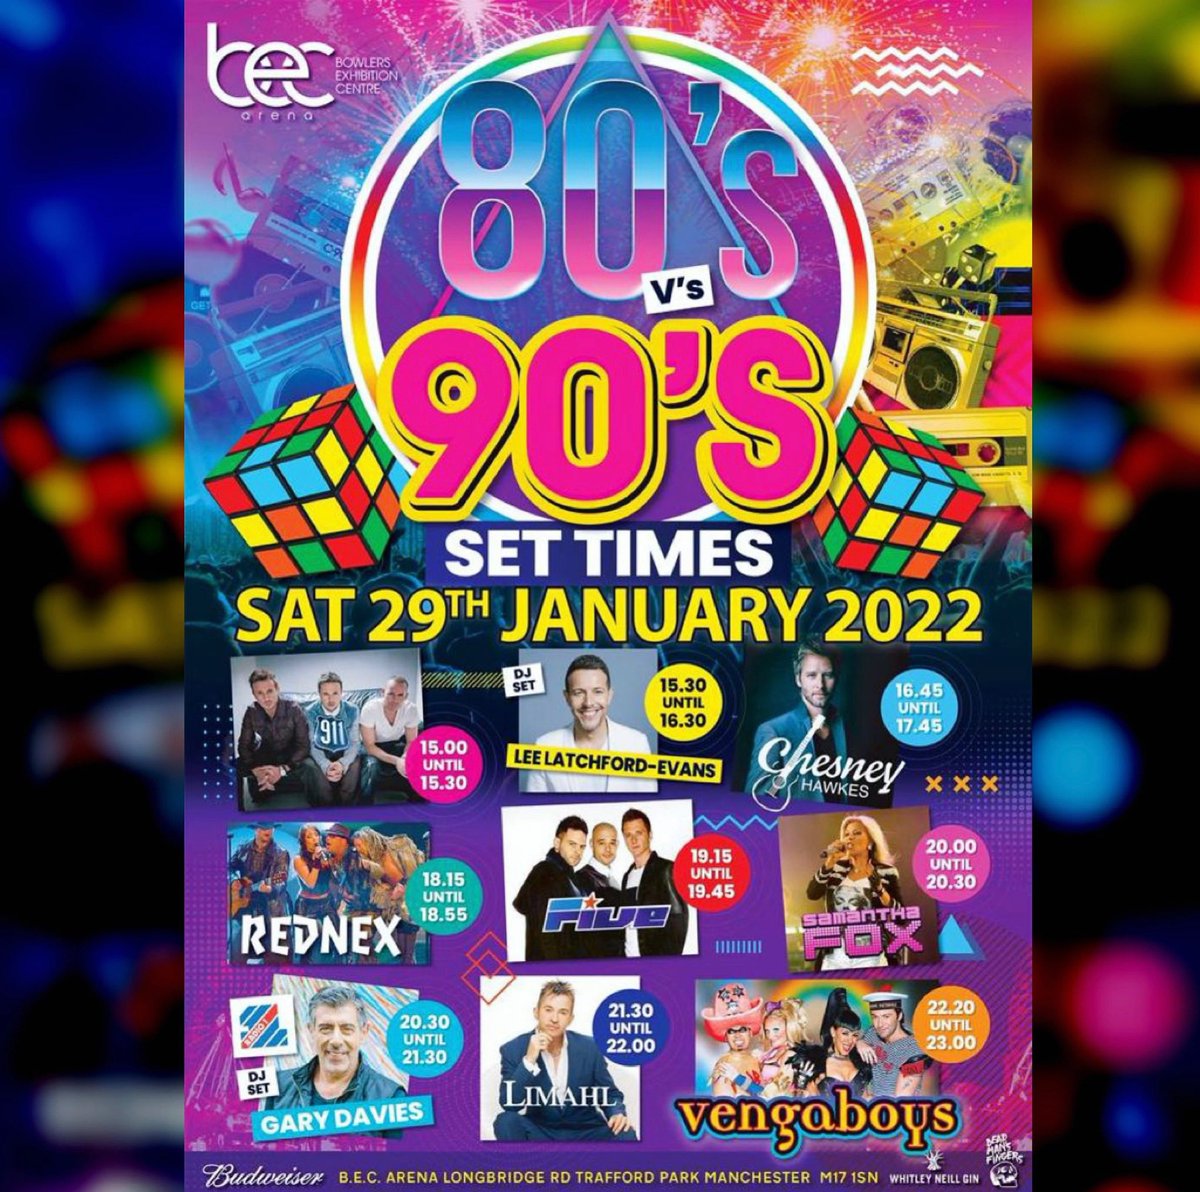 I’m looking forward to DJing at the 80s vs 90’s Festival @bowlersmanchester I’ll be playing 90’s hits & of course some @officialsteps Hopefully see you there. 🥳🎧 💃🏼 🕺🏻 Tickets available at: feverup.com/m/101893 #dj #music #fun #steps #manchester #birthday #sing #dance